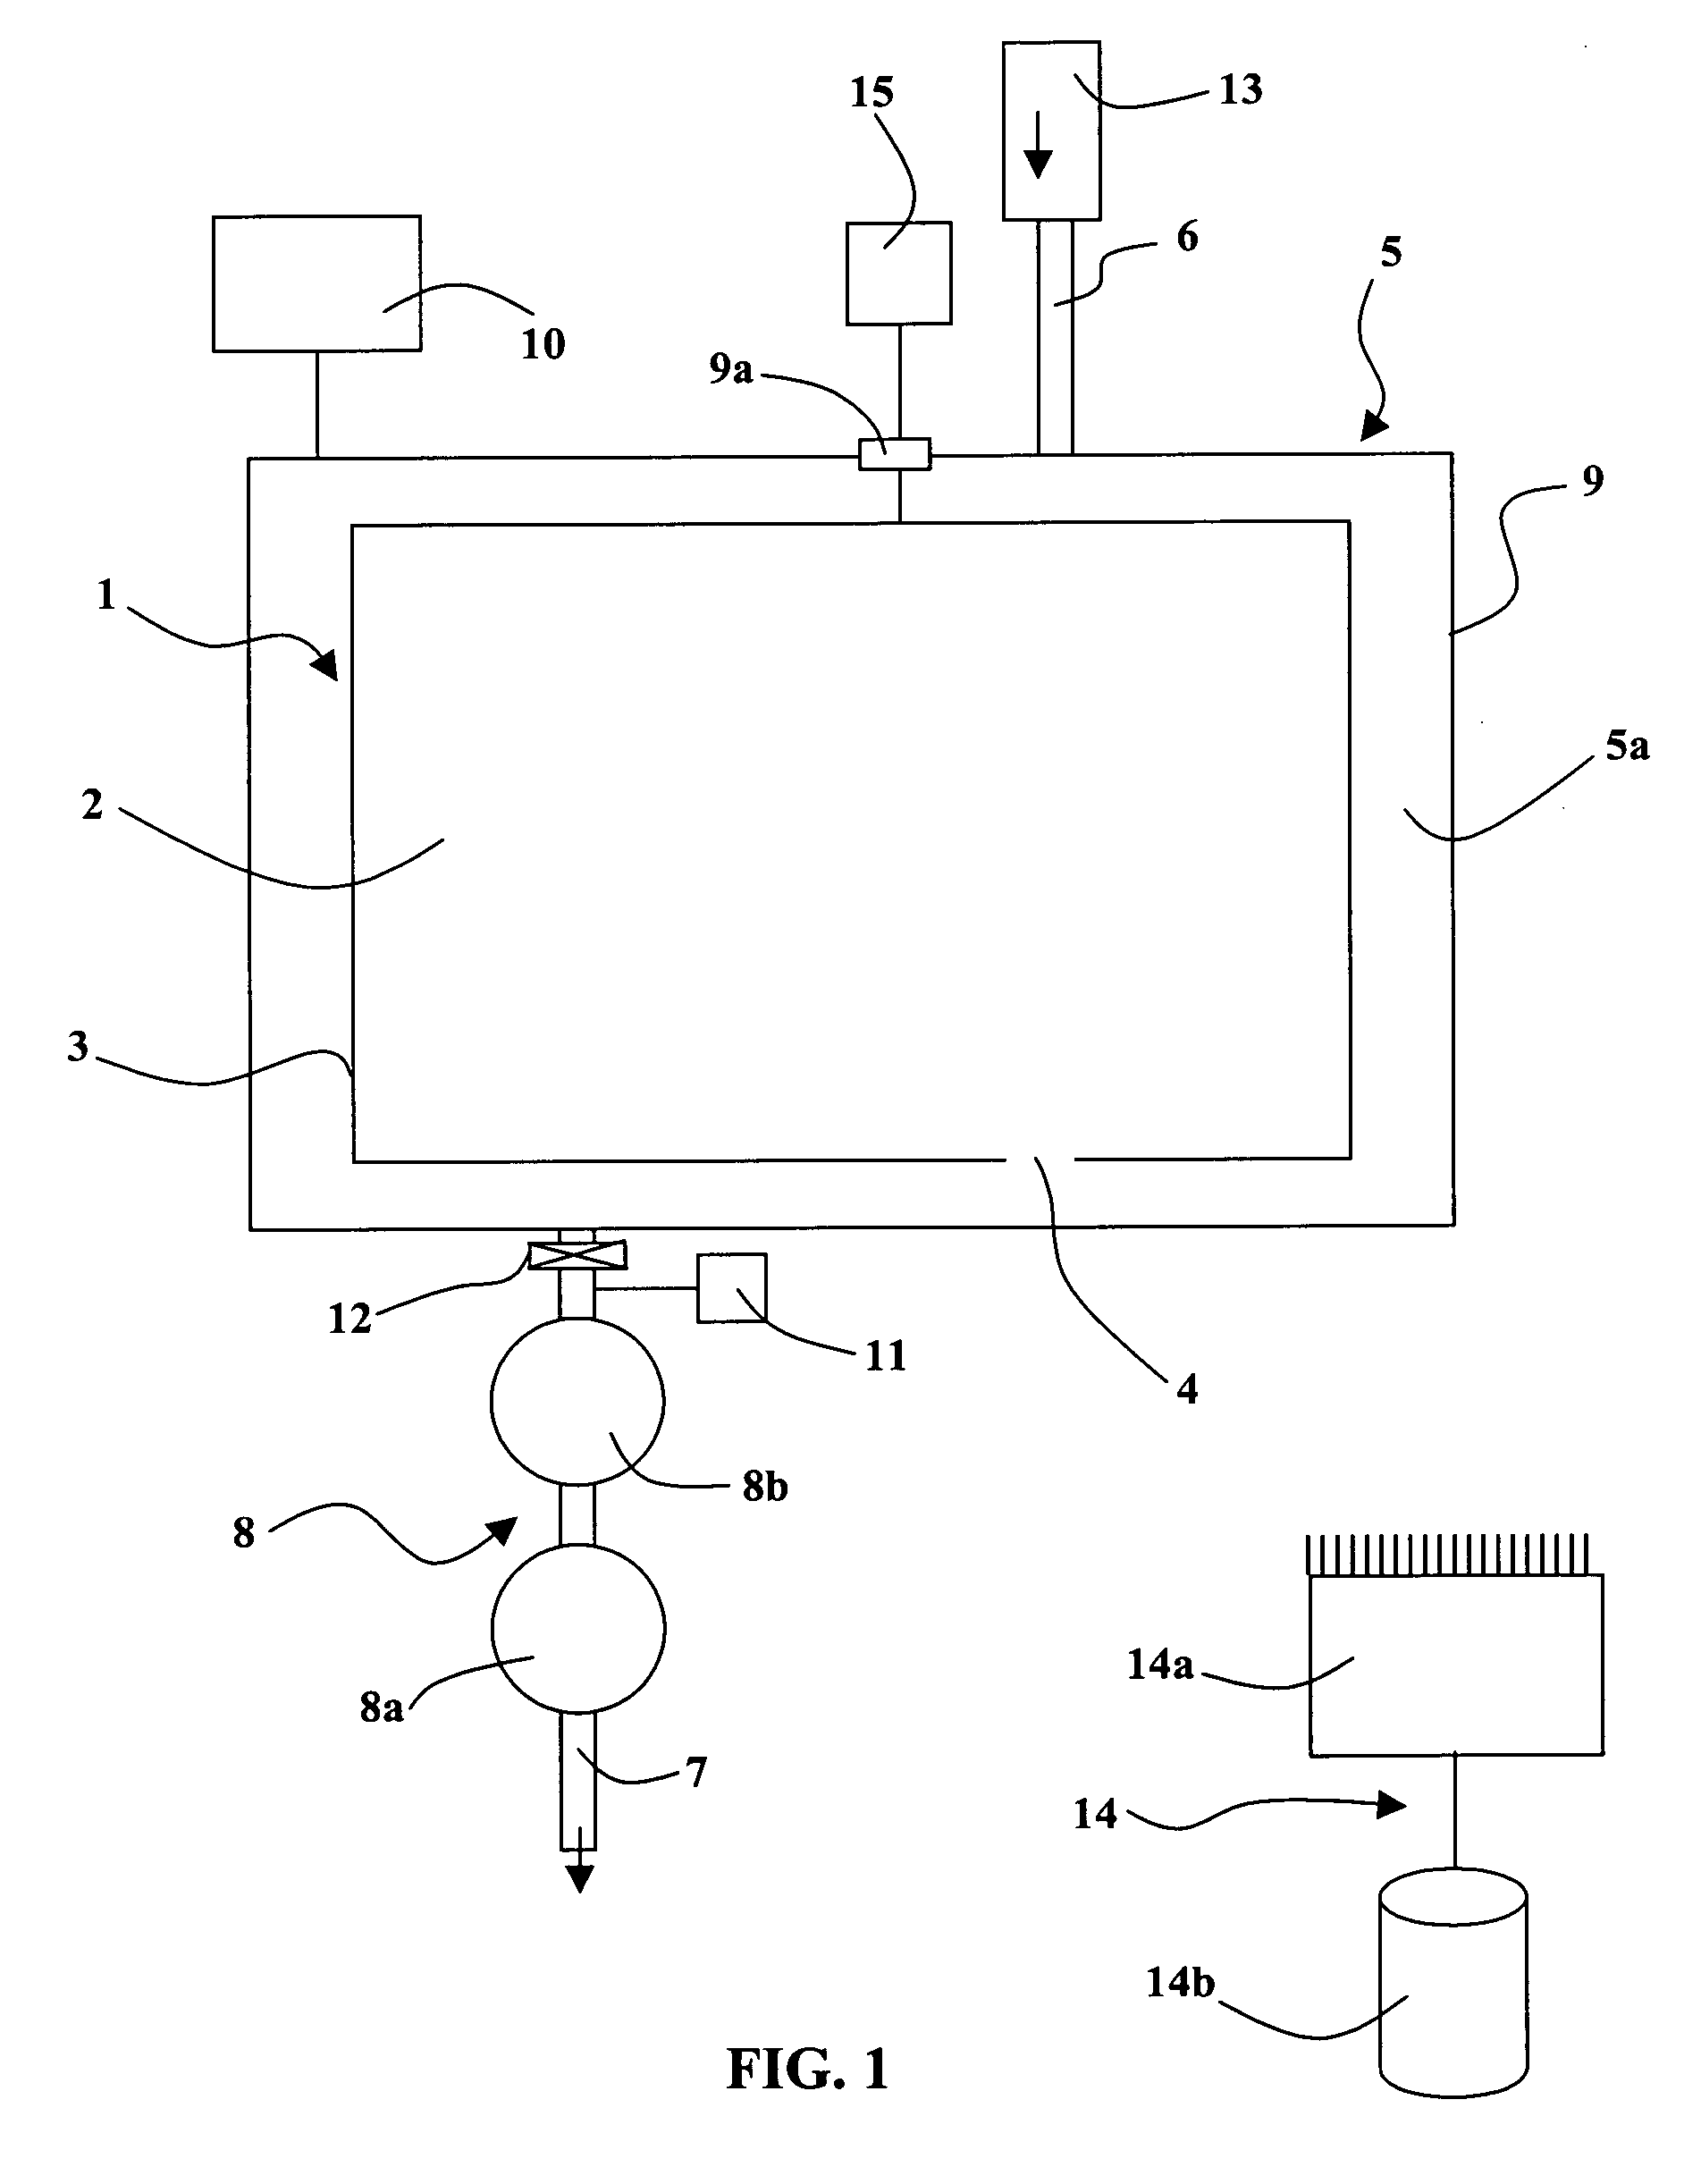 Method and Device for Removing Pollution From a Confined Environment